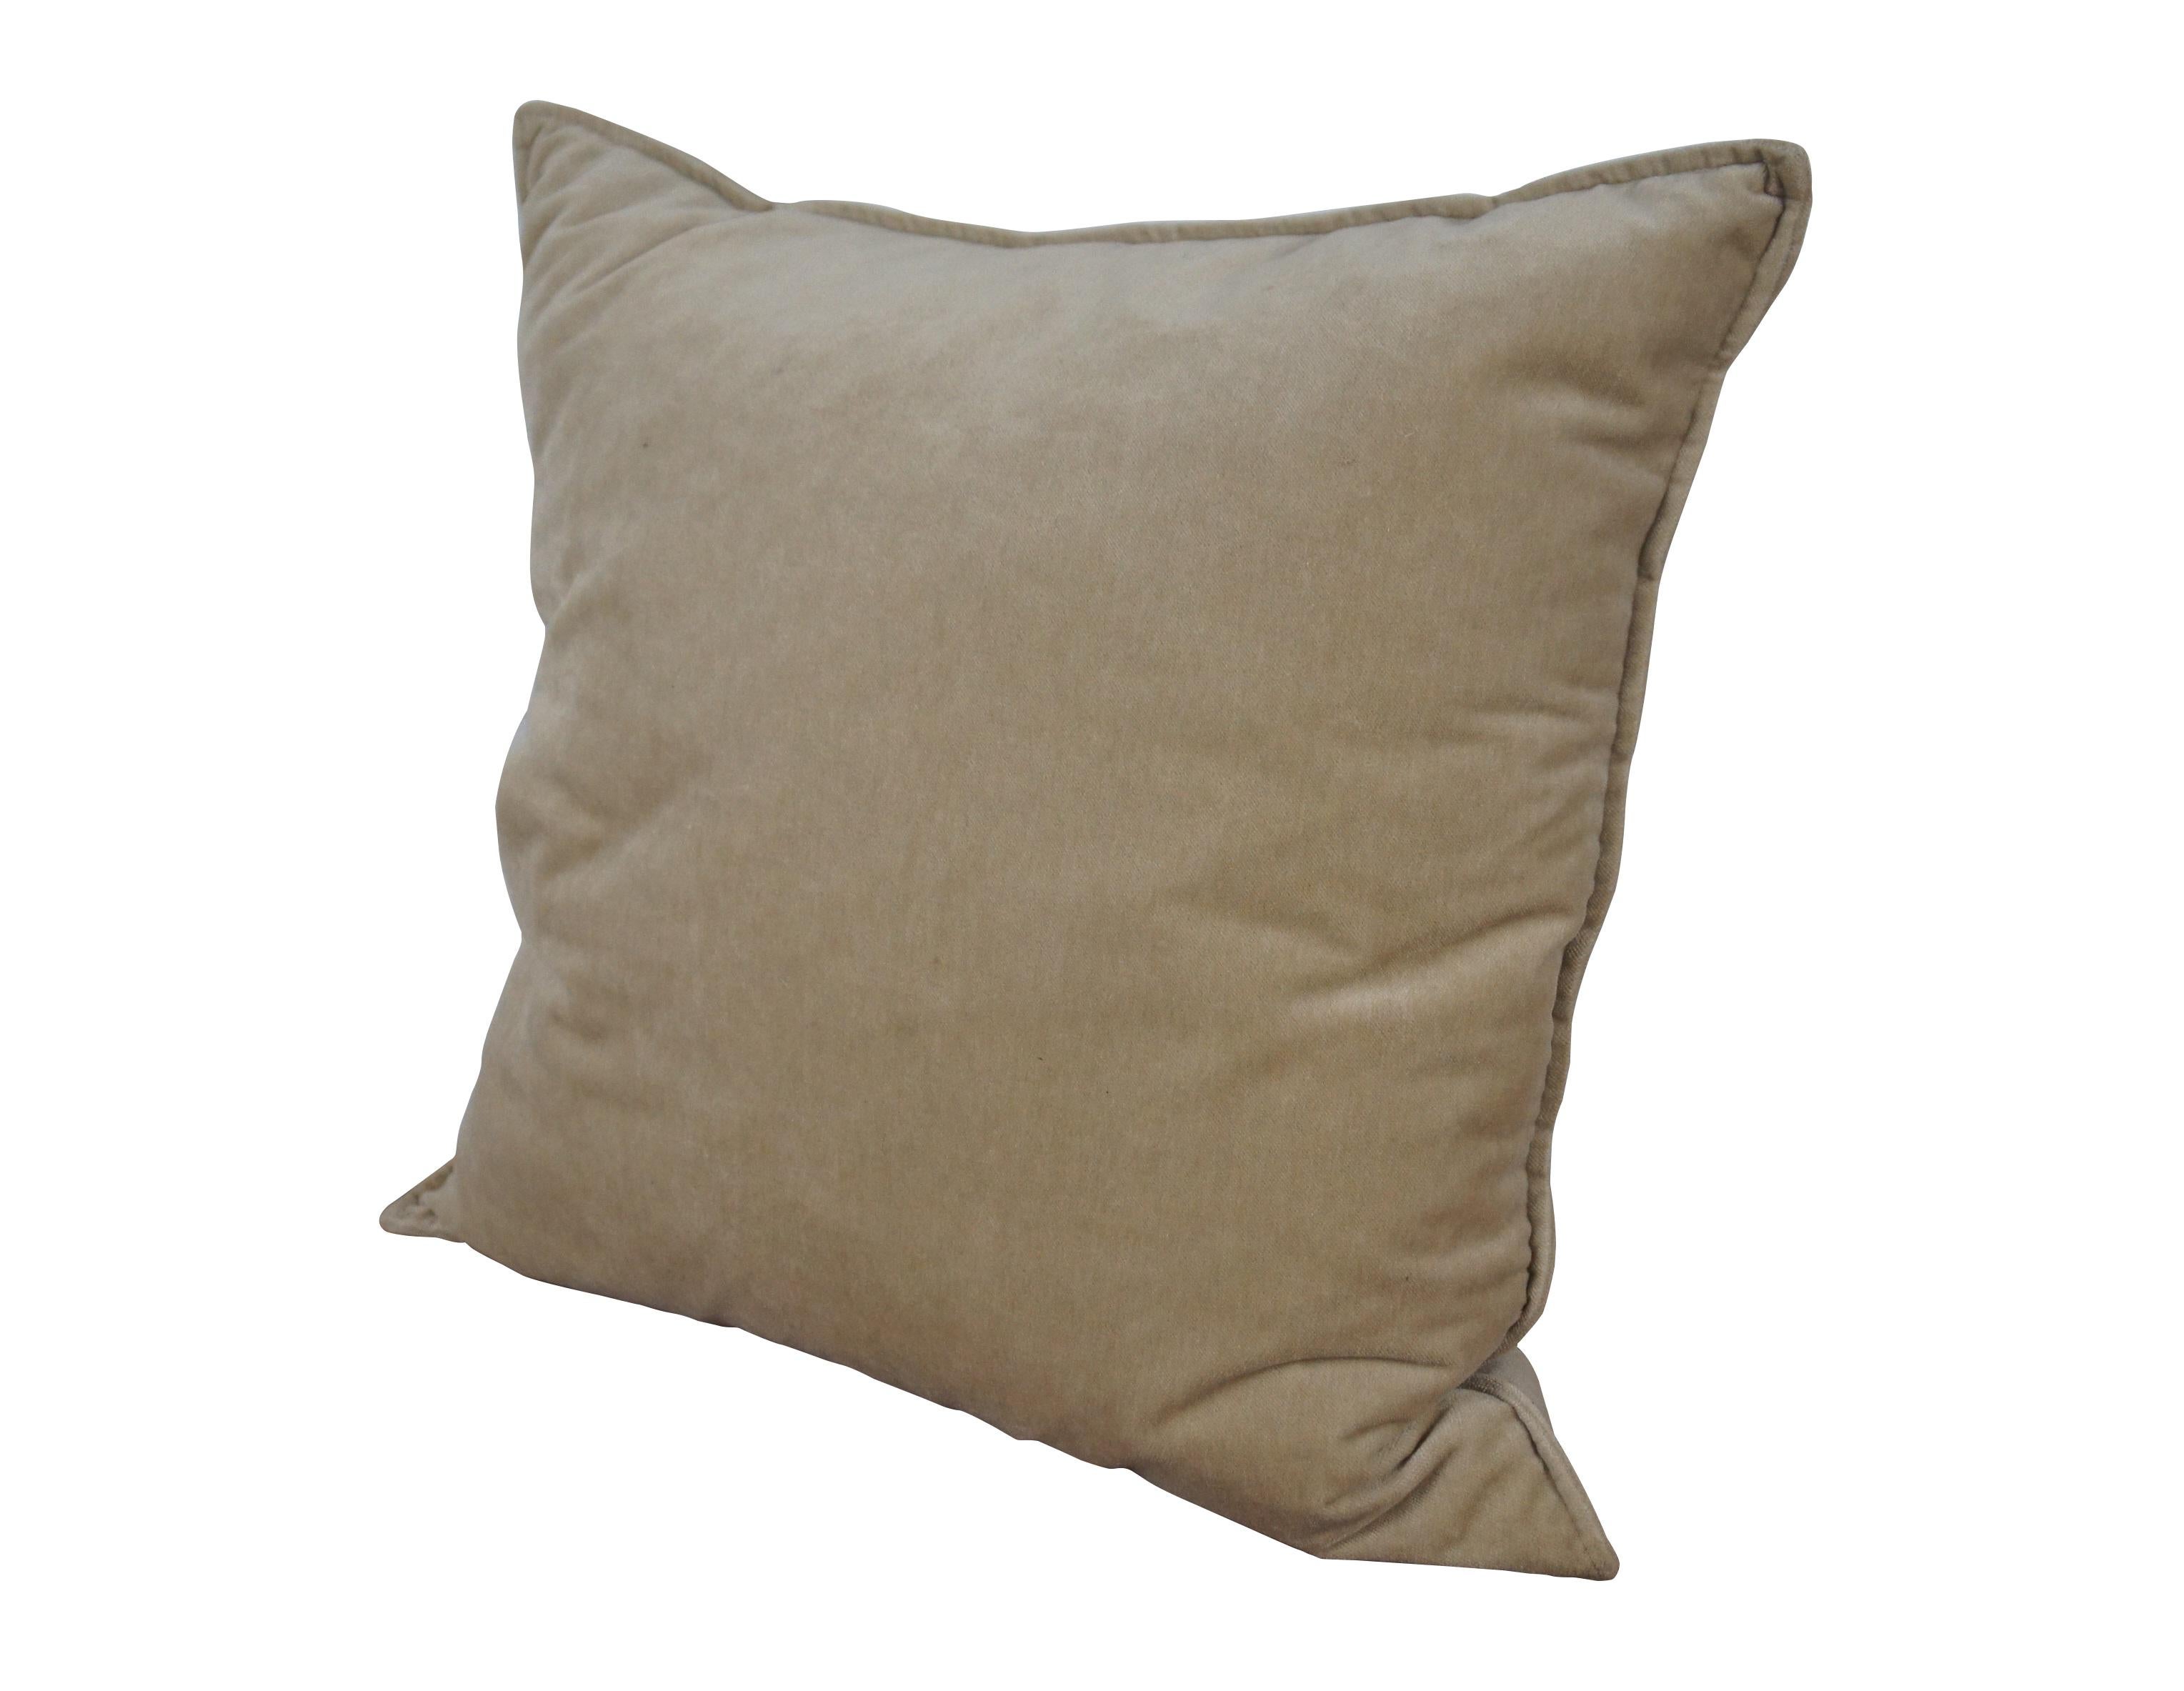 Late 20th century square throw pillow by Crate and Barrel. Vanilla / light brown 65% Polyester / 35% Cotton velour cover with piped edge and zipper closure. Down filled. Made in Mexico. Dry Clean Only.

Dimensions:
20